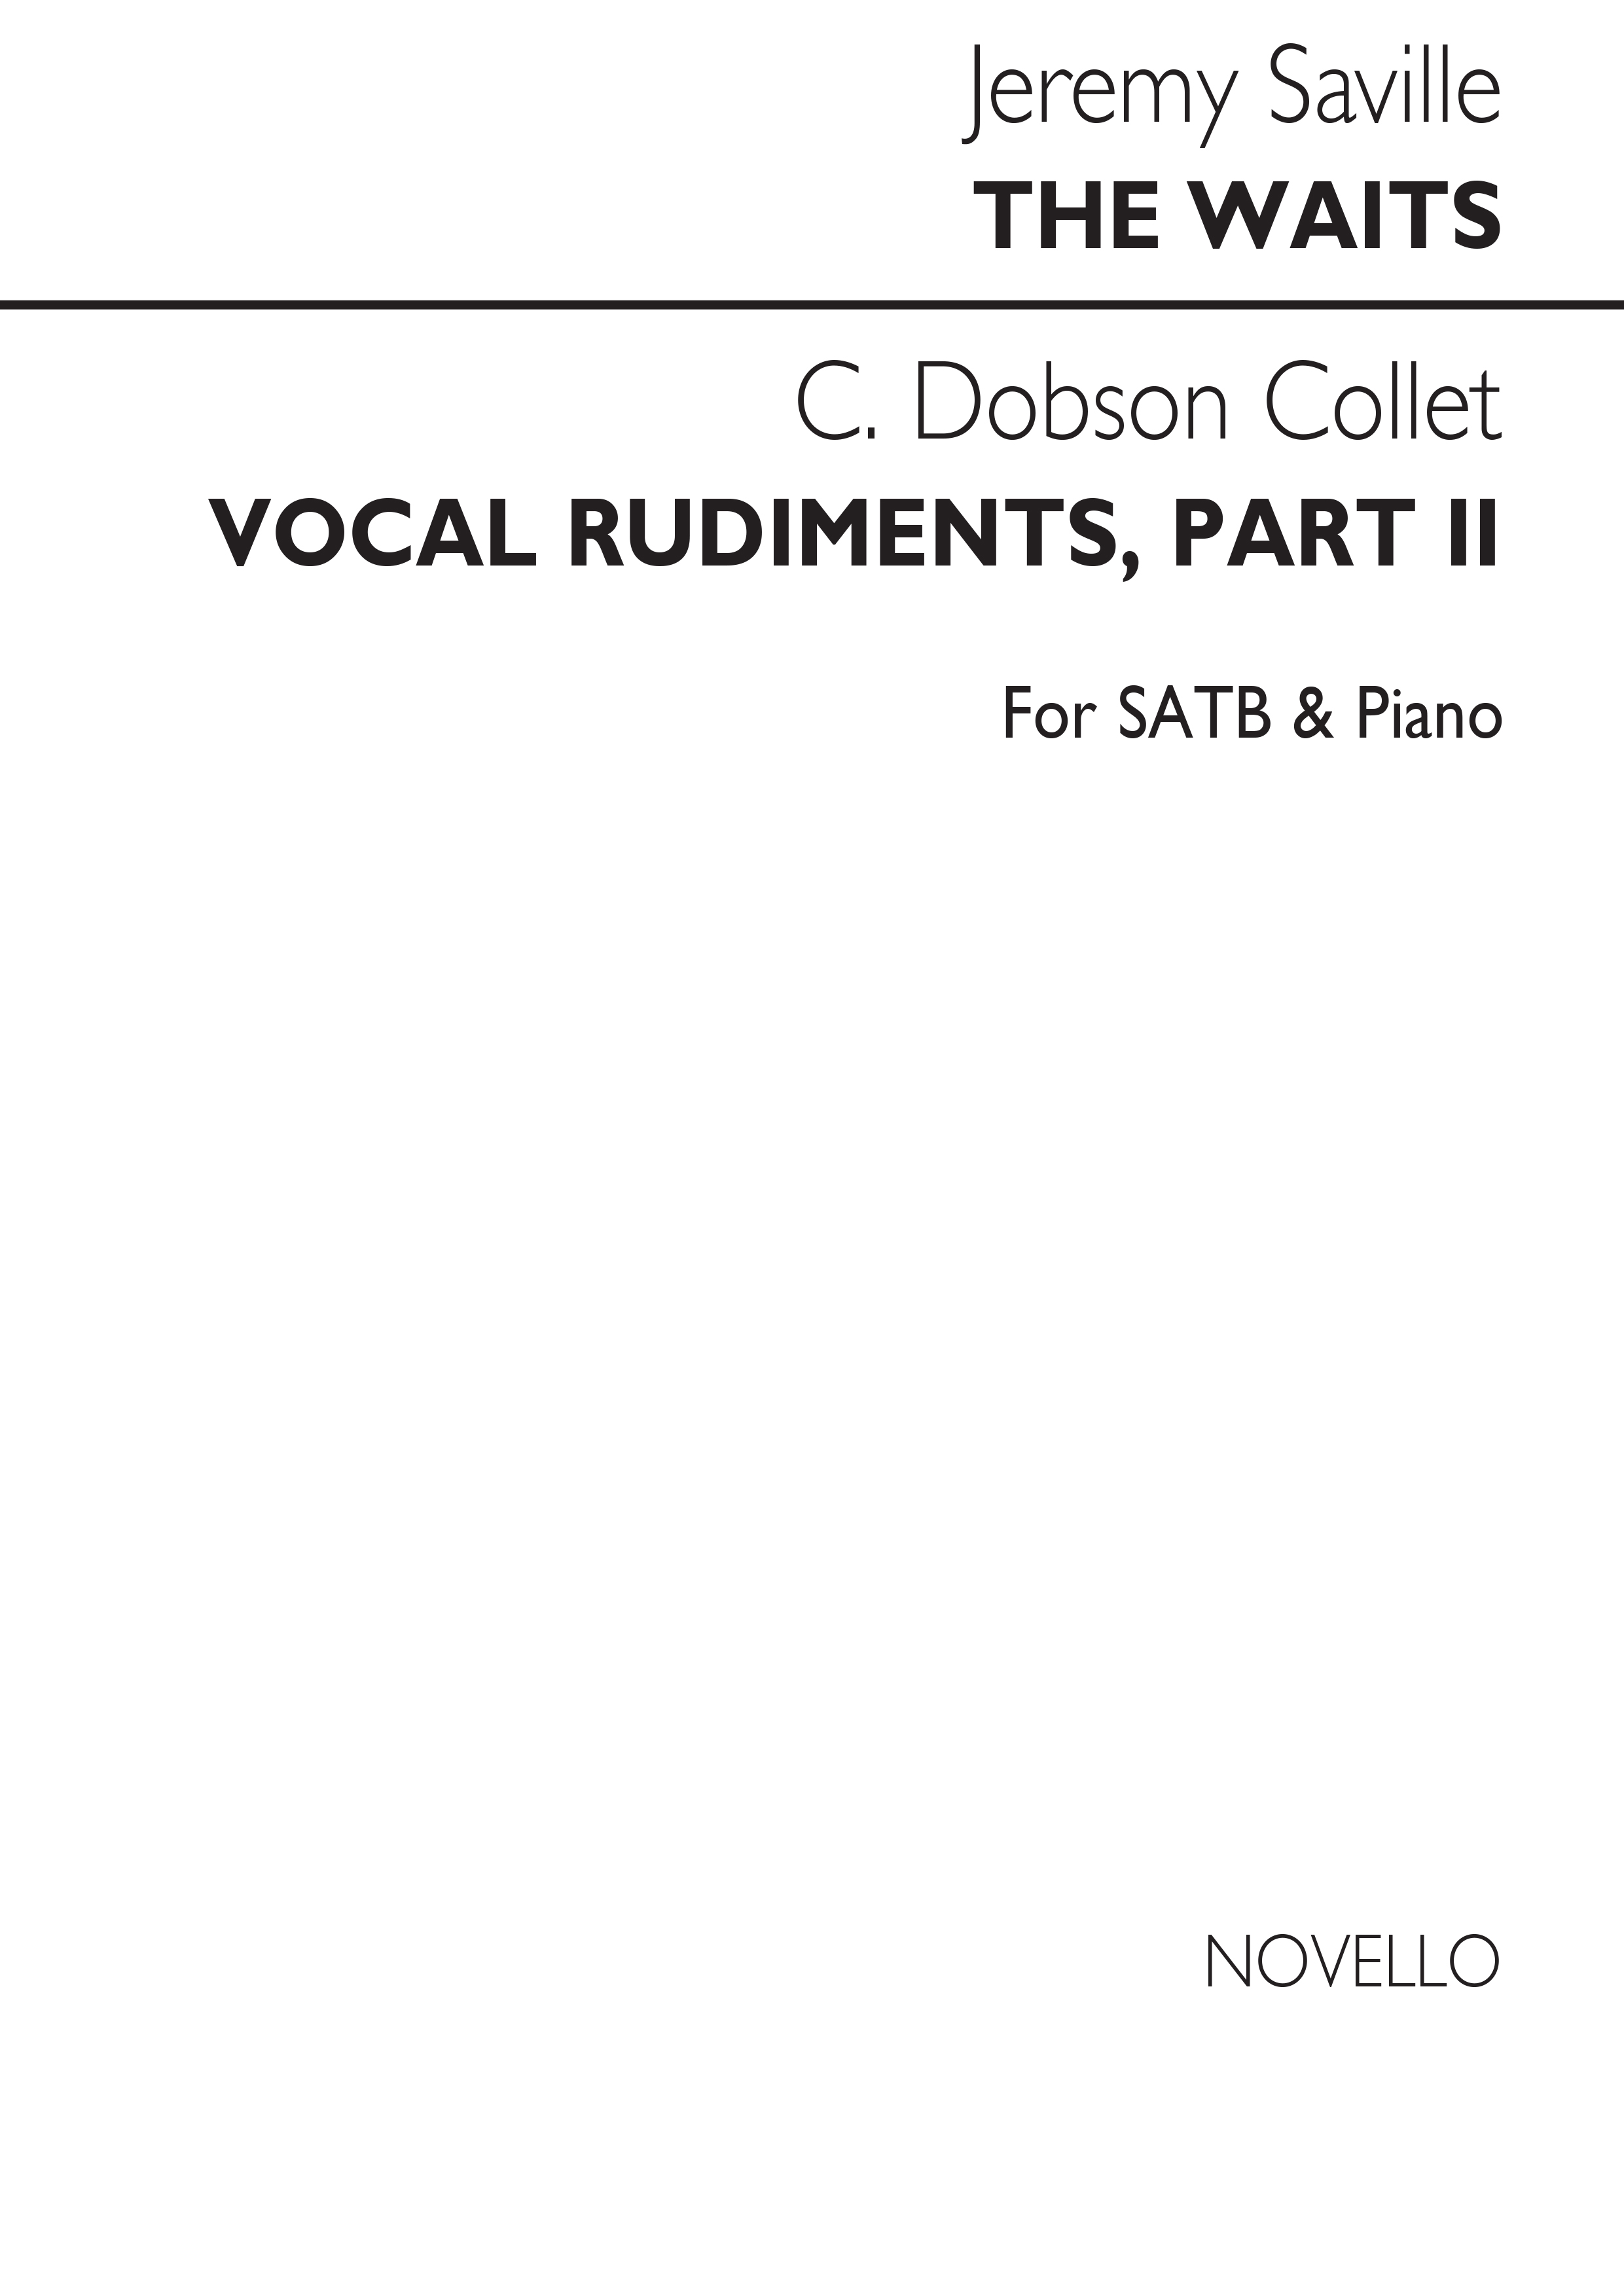 Jeremy Saville: The Waits Satb/Piano / Dobson Collet-vocal Rudiments Pt 2